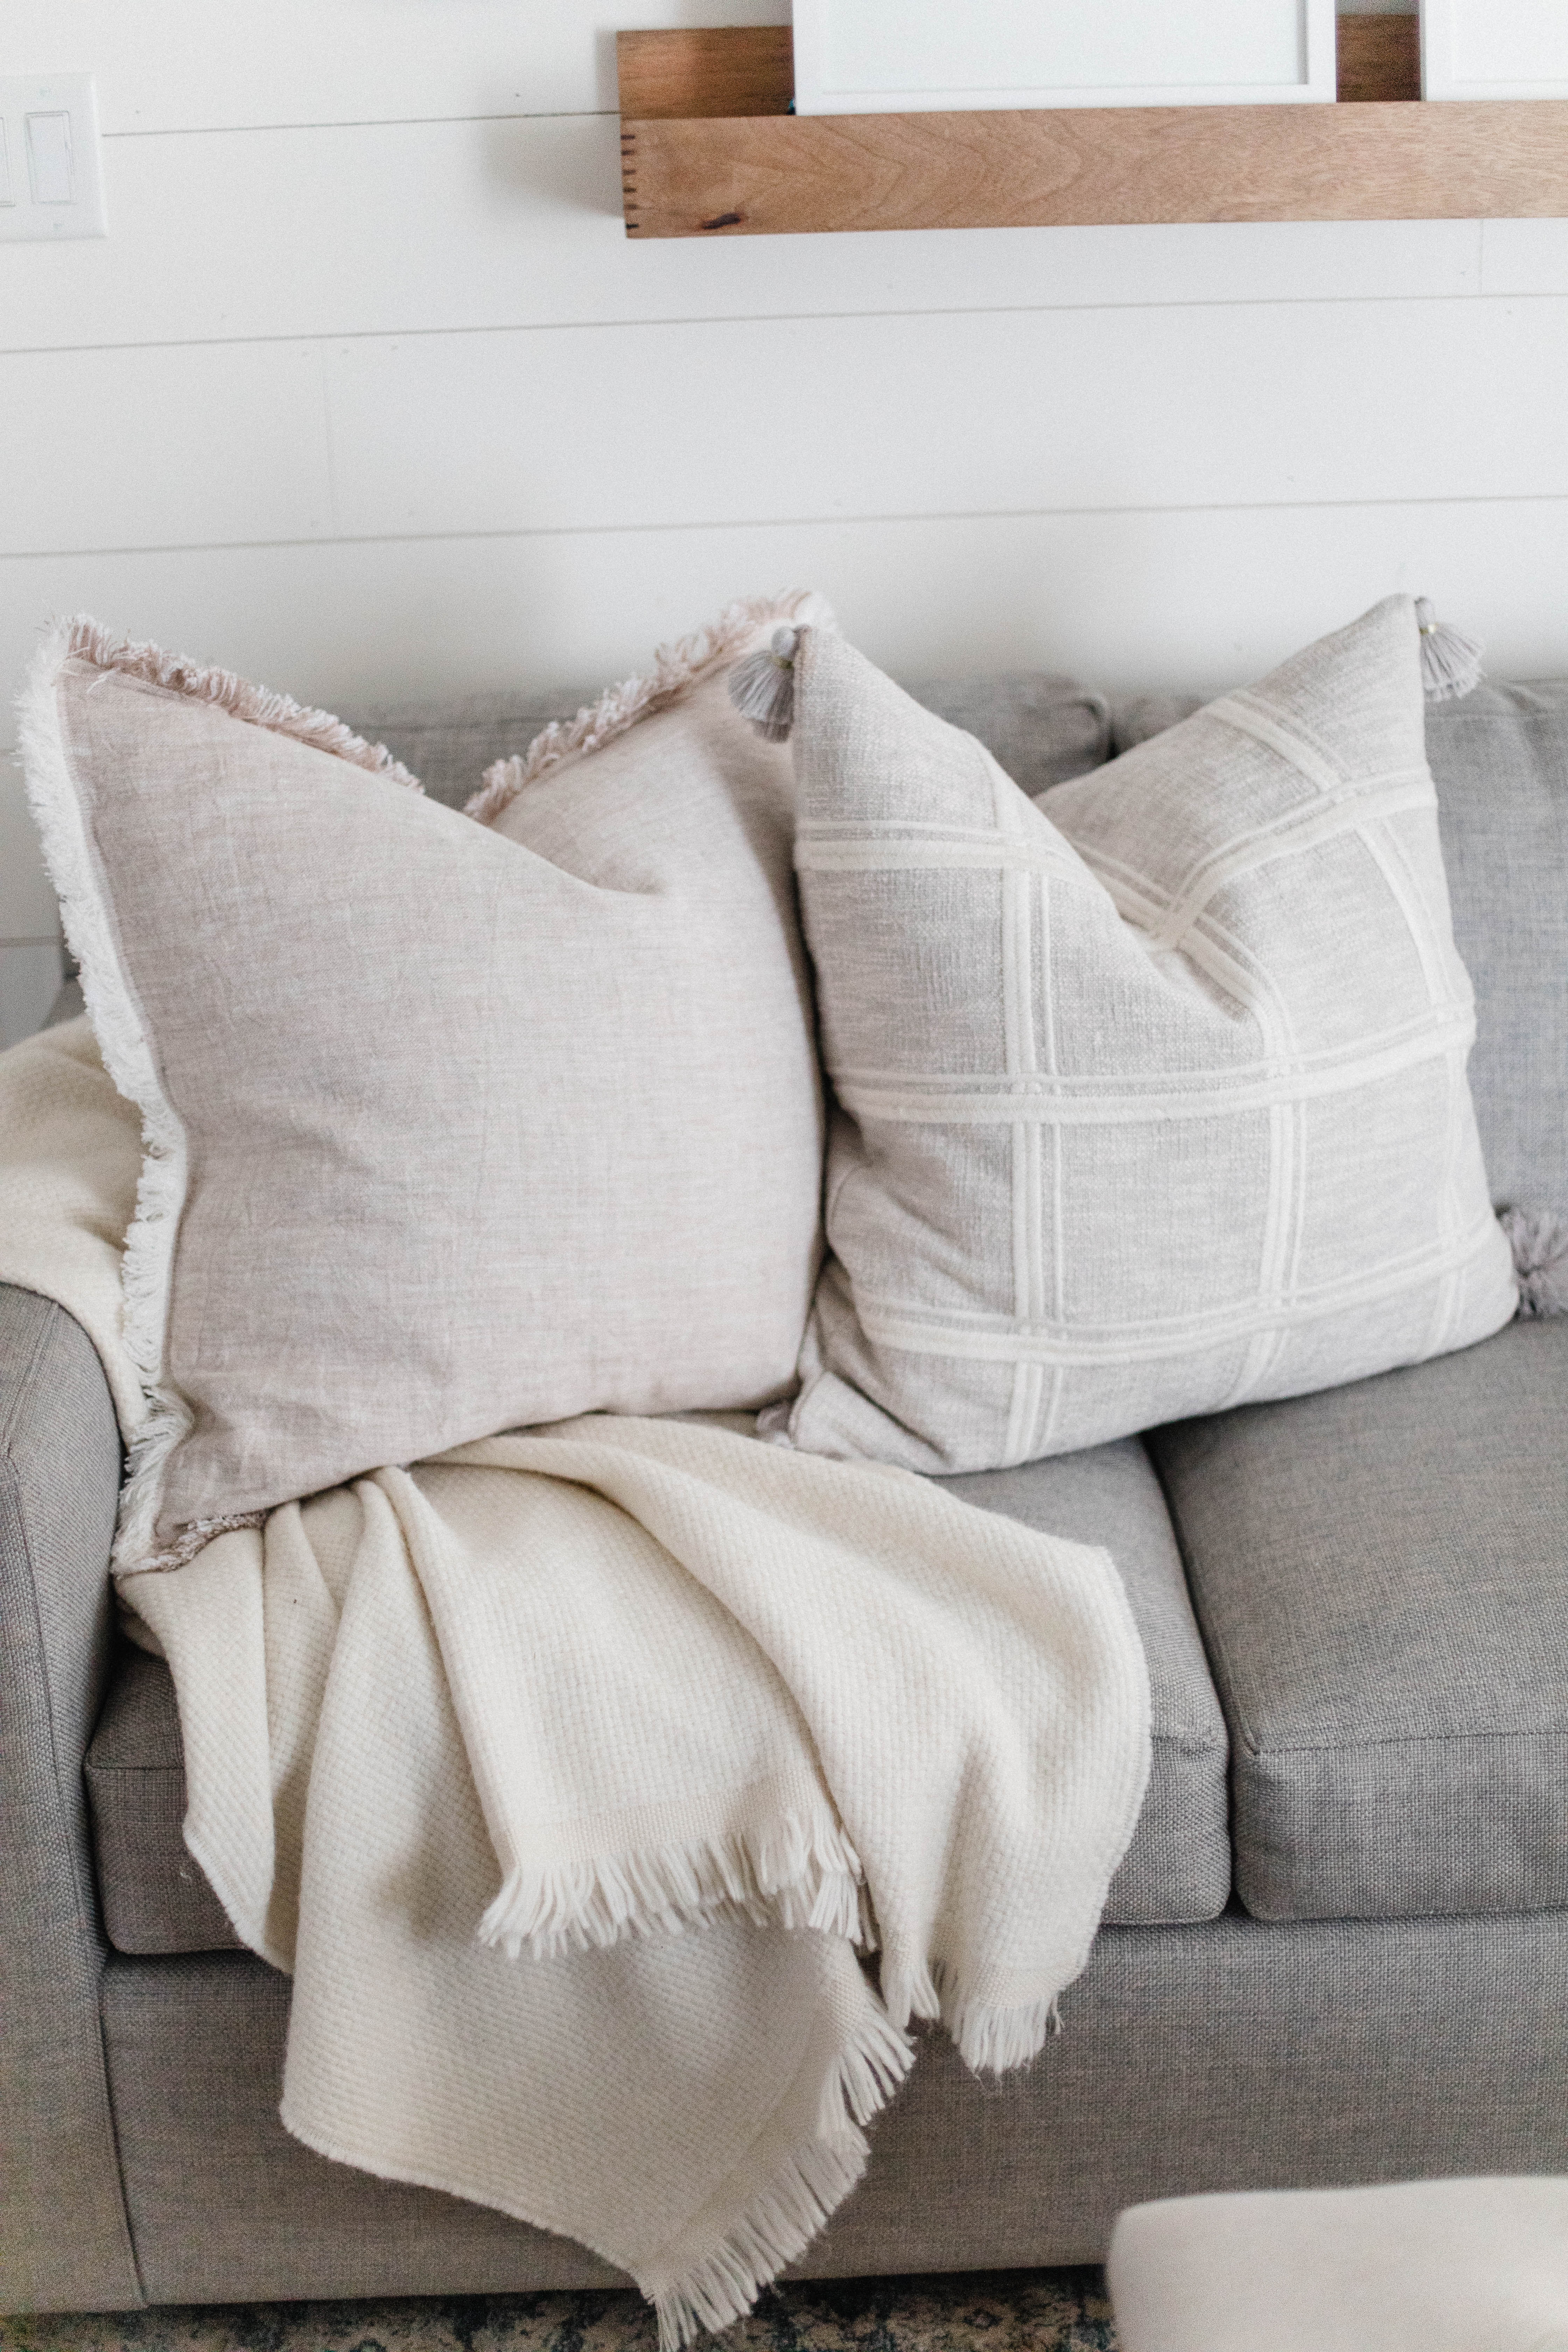 Love Serena + Lily? Right now they are having the biggest sale of the year. Not sure what to get? Connecticut Lifestyle Blogger Lauren McBride is sharing her top picks to grab from this year's Serena & Lily Thankful Sale. Click to see them here!